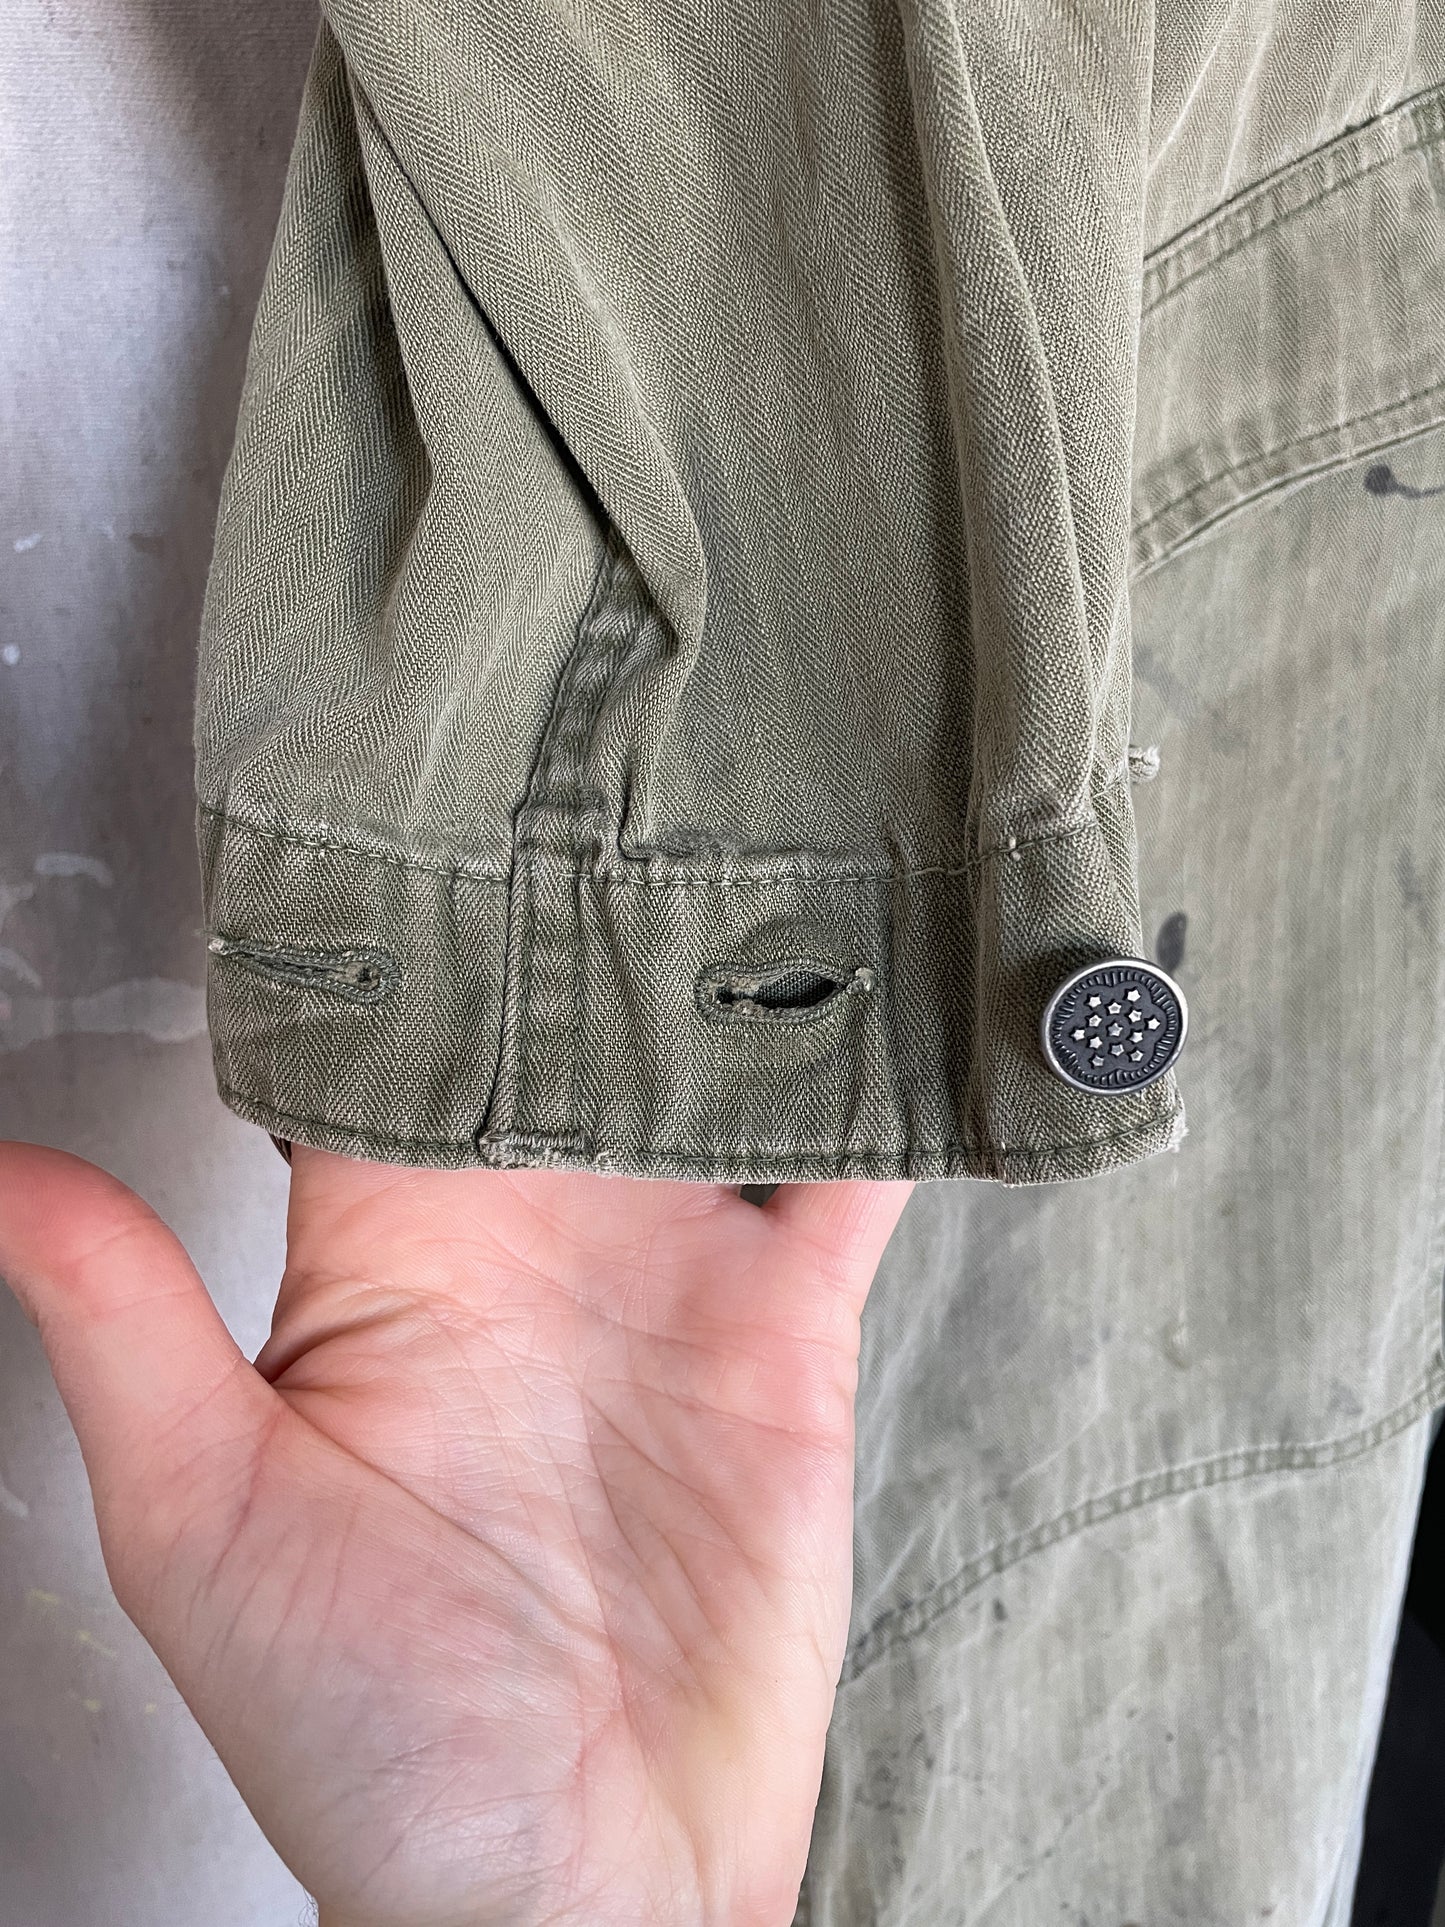 50s HBT 13 Star Military Coveralls